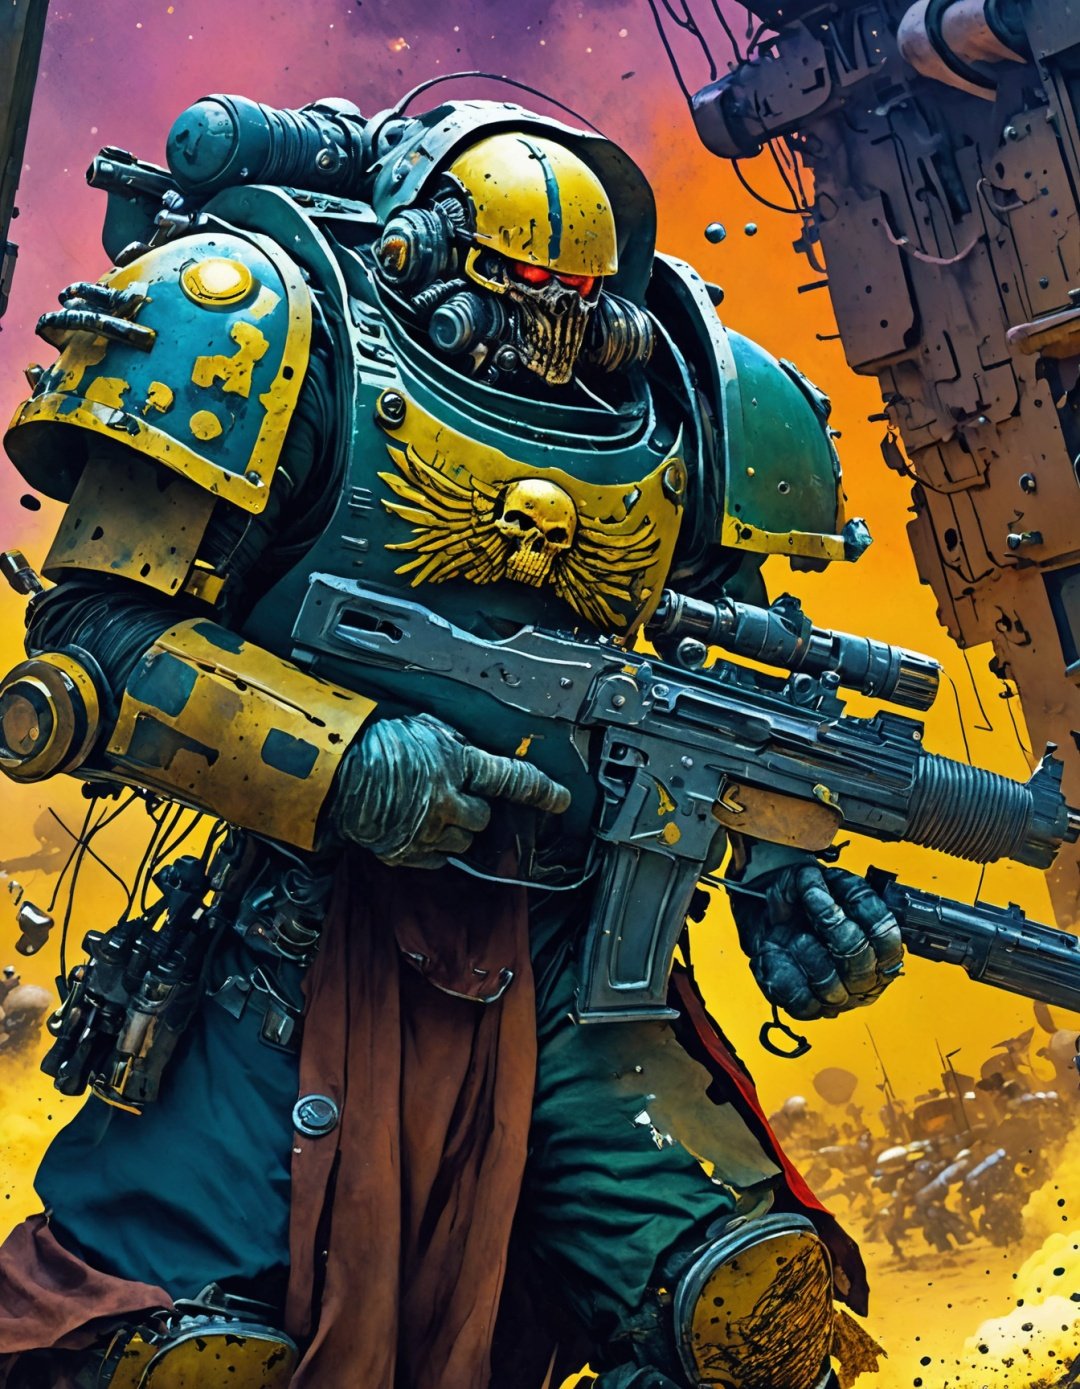  Drawing inspiration from modern masters like Yoshitaka Amano,Katsuya Terada, moebius inspired metal hurlant art In the middle of a chaotic skirmish, a space marine takes a defensive stance, unloading rounds from his boltgun into the advancing alien horde., warhammer 40000, , the contrast in colors and textures should be distinct surreal,highly detailed,vibrant yet slightly desaturated,dramatic lighting,sense of motion,grainy texture,retro-futuristic, deep digital painting layers,fluid watercolor techniques,meticulous detailing,soft ambient lighting, vibrant colors,subtle emotional nuances